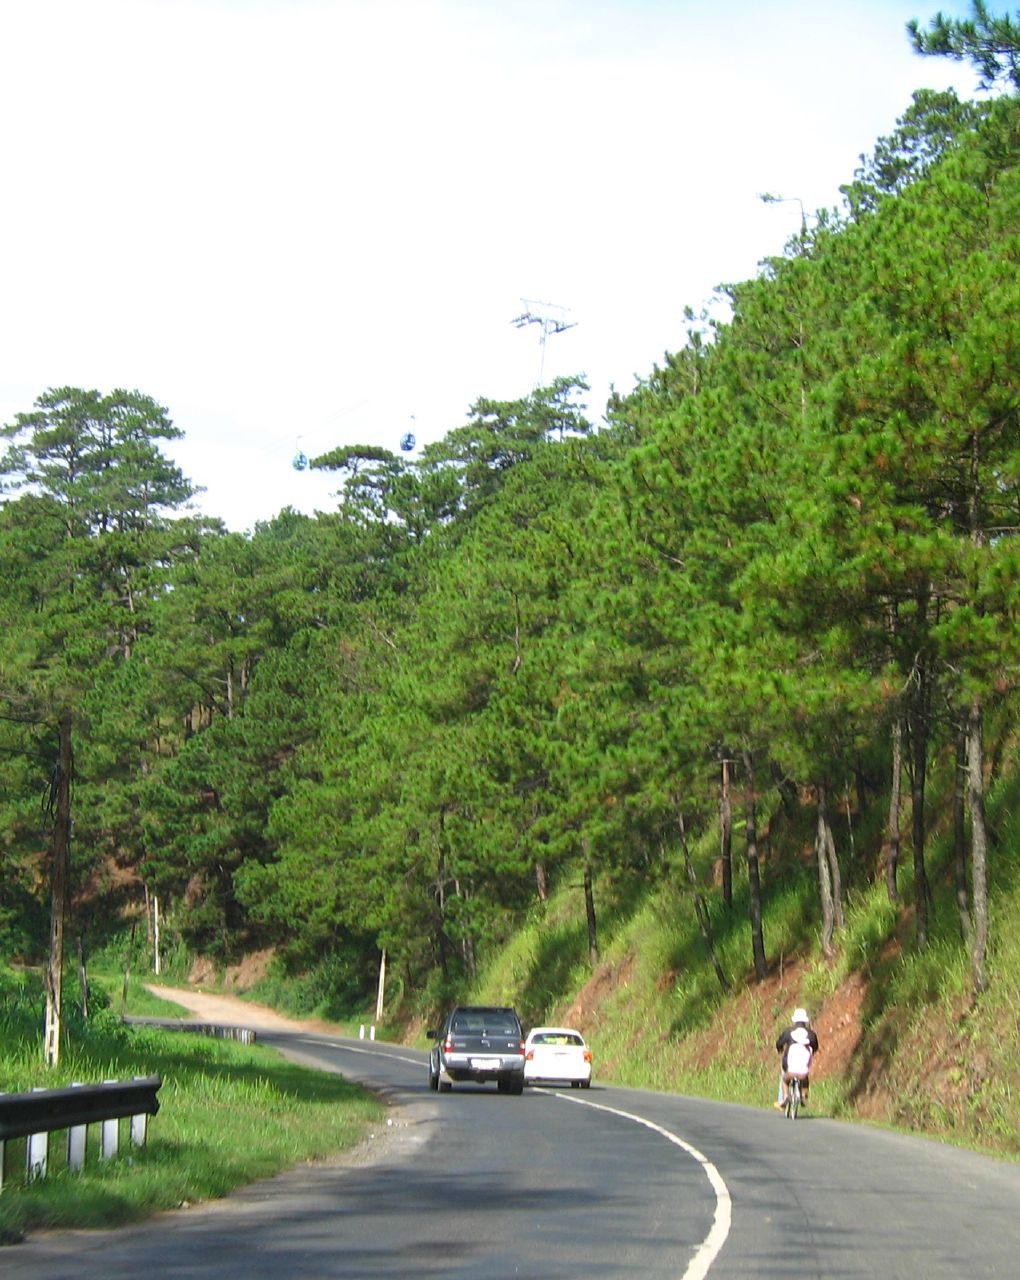 a car on a road that has pine trees and grass on the sides